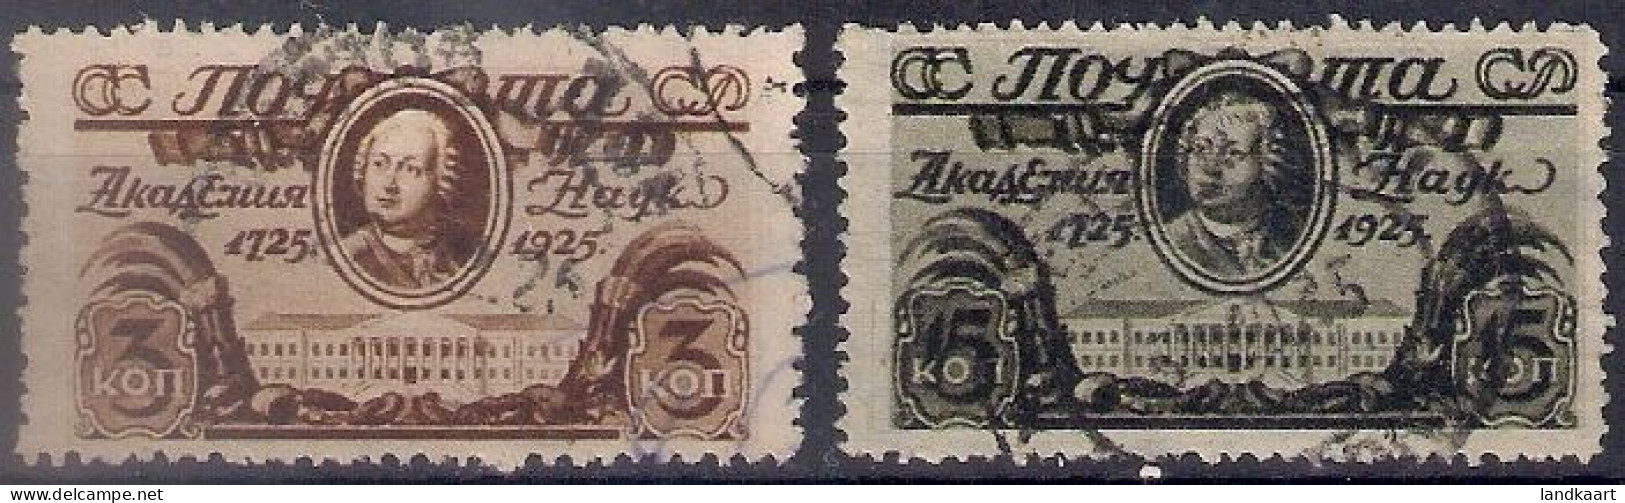 Russia 1925, Michel Nr 298-99, Used - Used Stamps